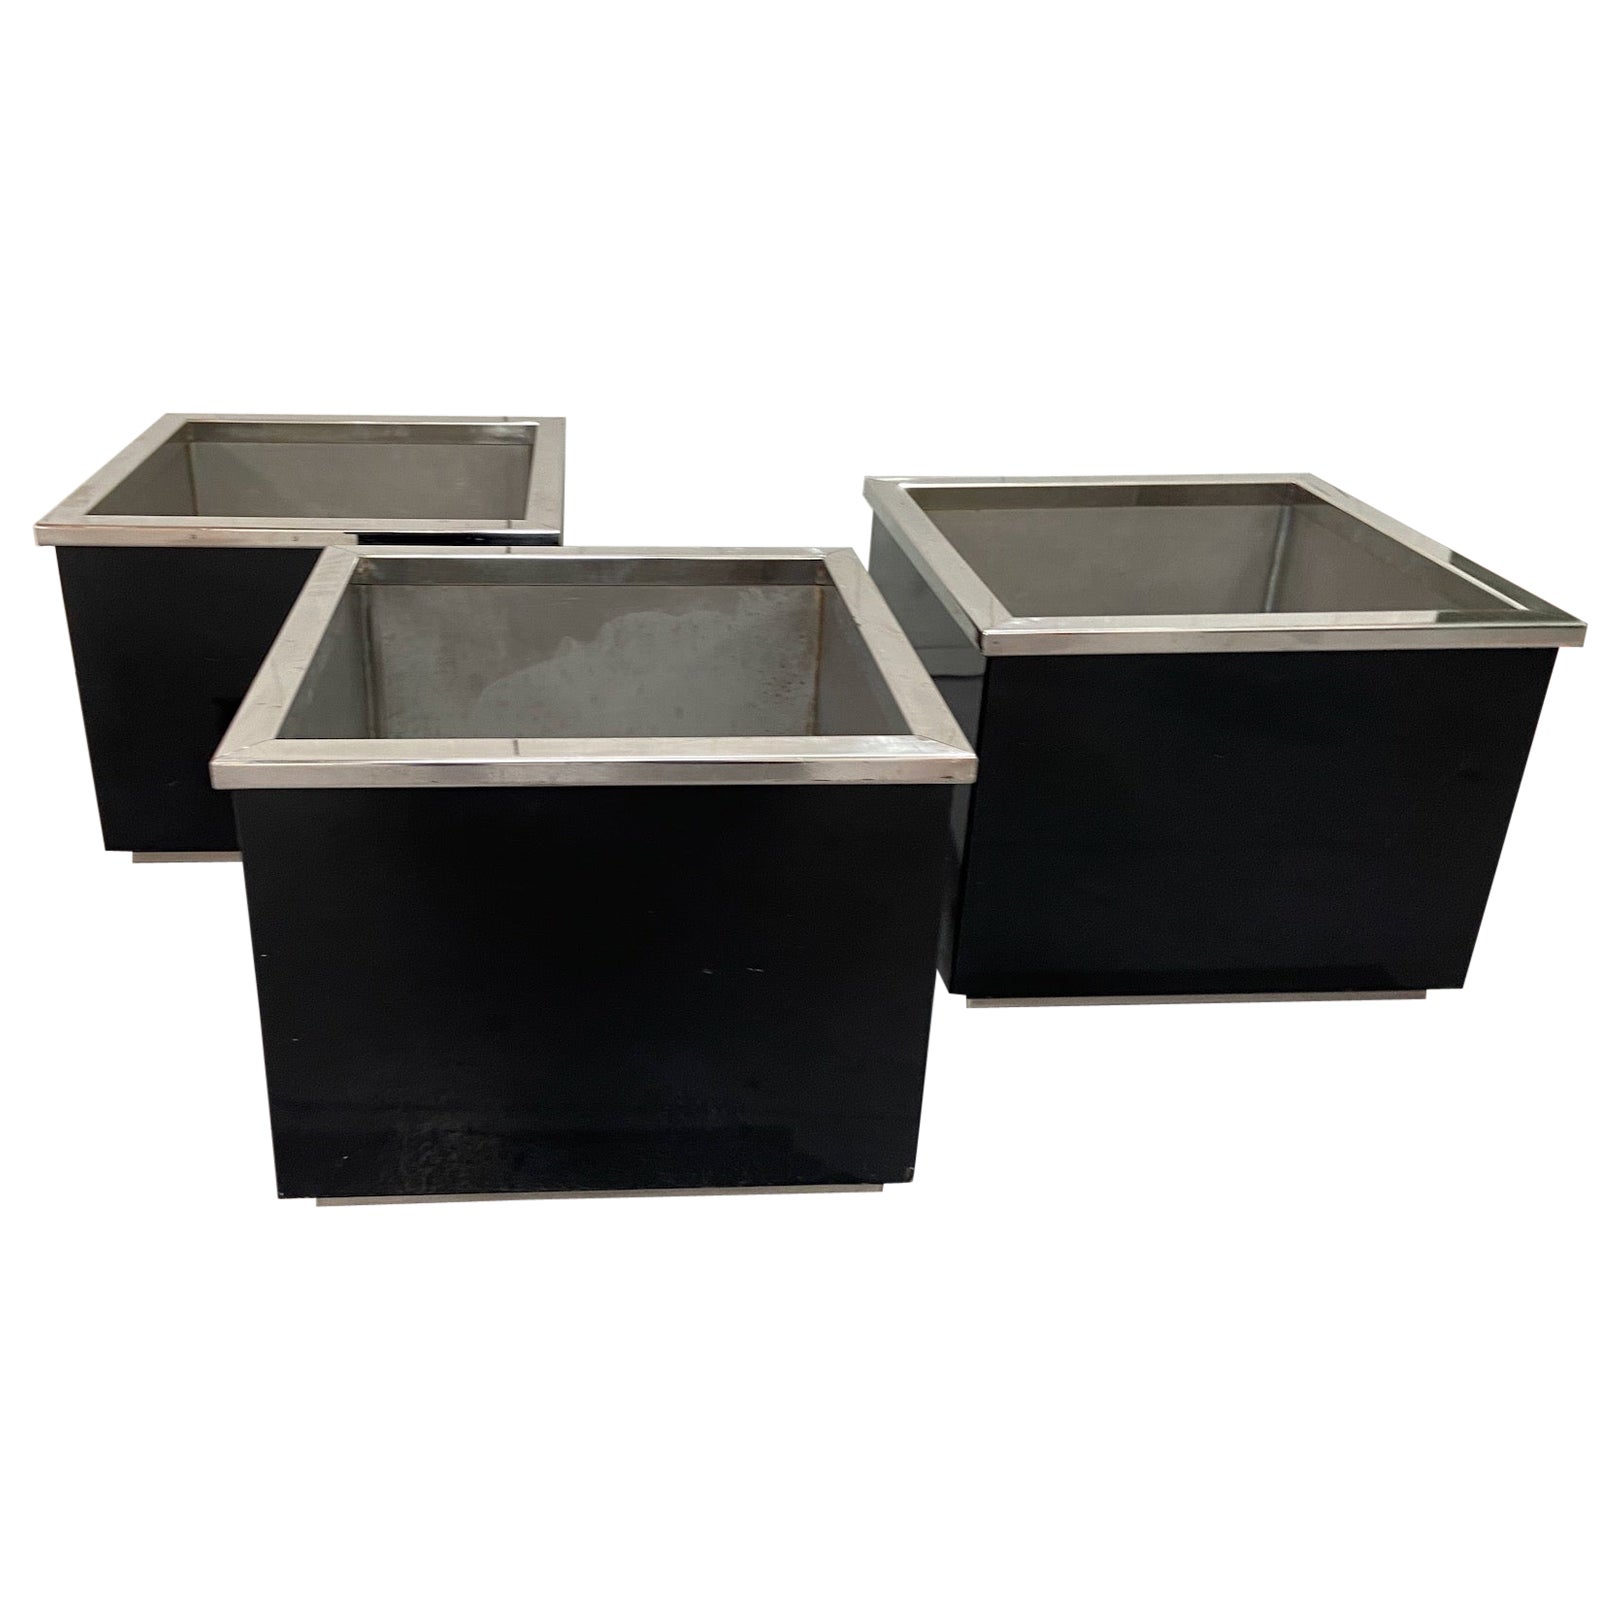 1960s-70s black enamel and chrome metal cubic planters, manner of Willy Rizzo For Sale